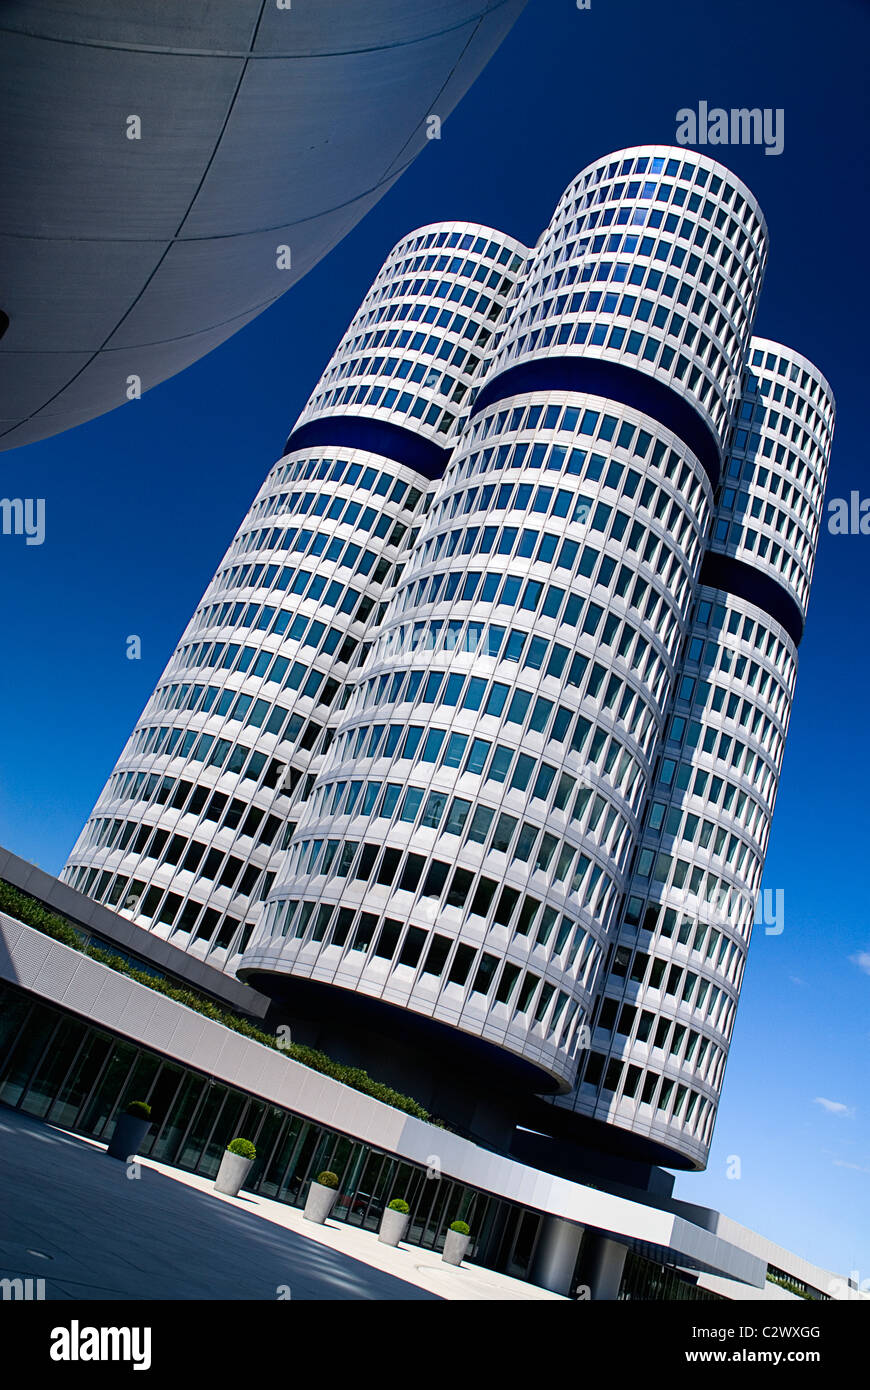 Germany, Bavaria, Munich, BMW Headquarters, The BMW Tower is 101 metres tall and mimics the shape of tyres. Stock Photo